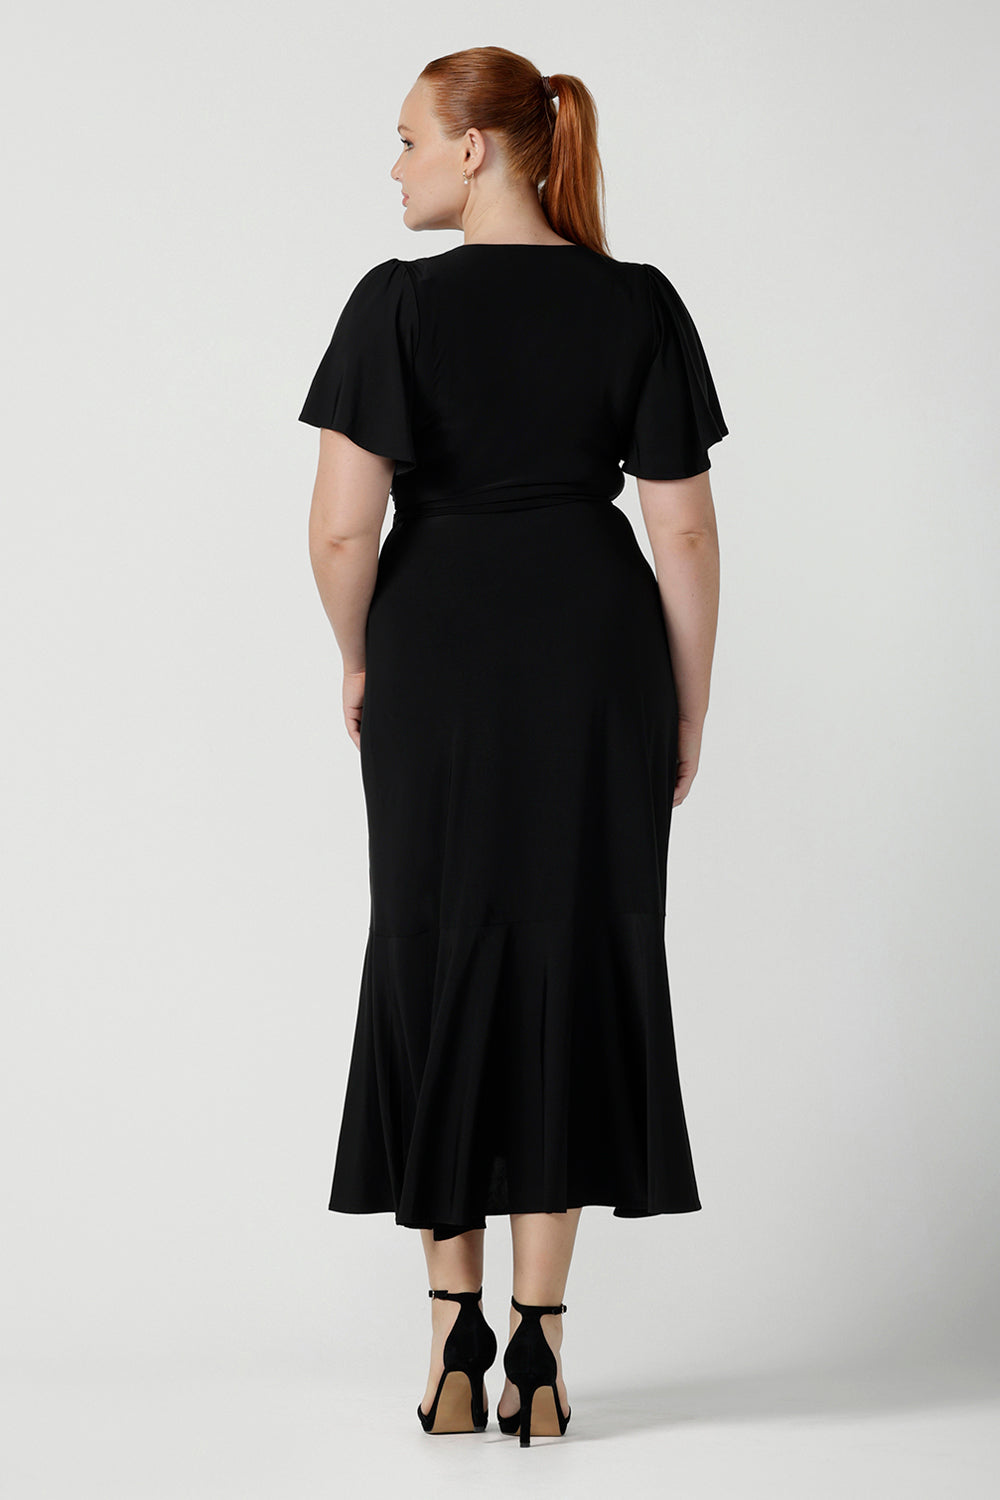 Back view of a size 12 woman wears a Alita dress in black. An elegant wrap dress with a tier and sweetheart neckline and flutter sleeve. Made in Australia for women size 8 - 24.